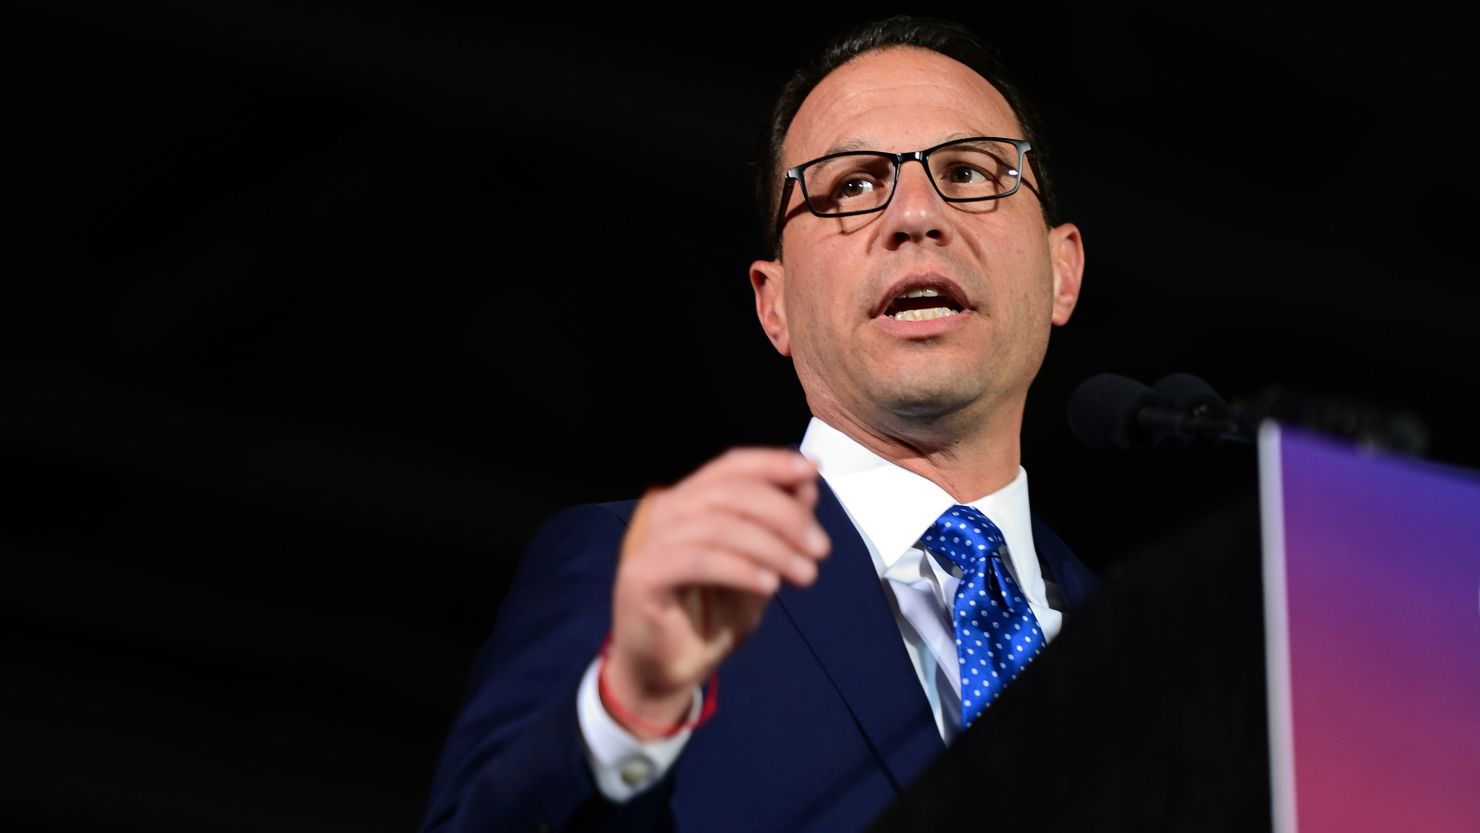 Pennsylvania Democrat Josh Shapiro gives a victory speech at the Greater Philadelphia Expo Center in Oaks on November 8, 2022, after winning his bid for governor. 